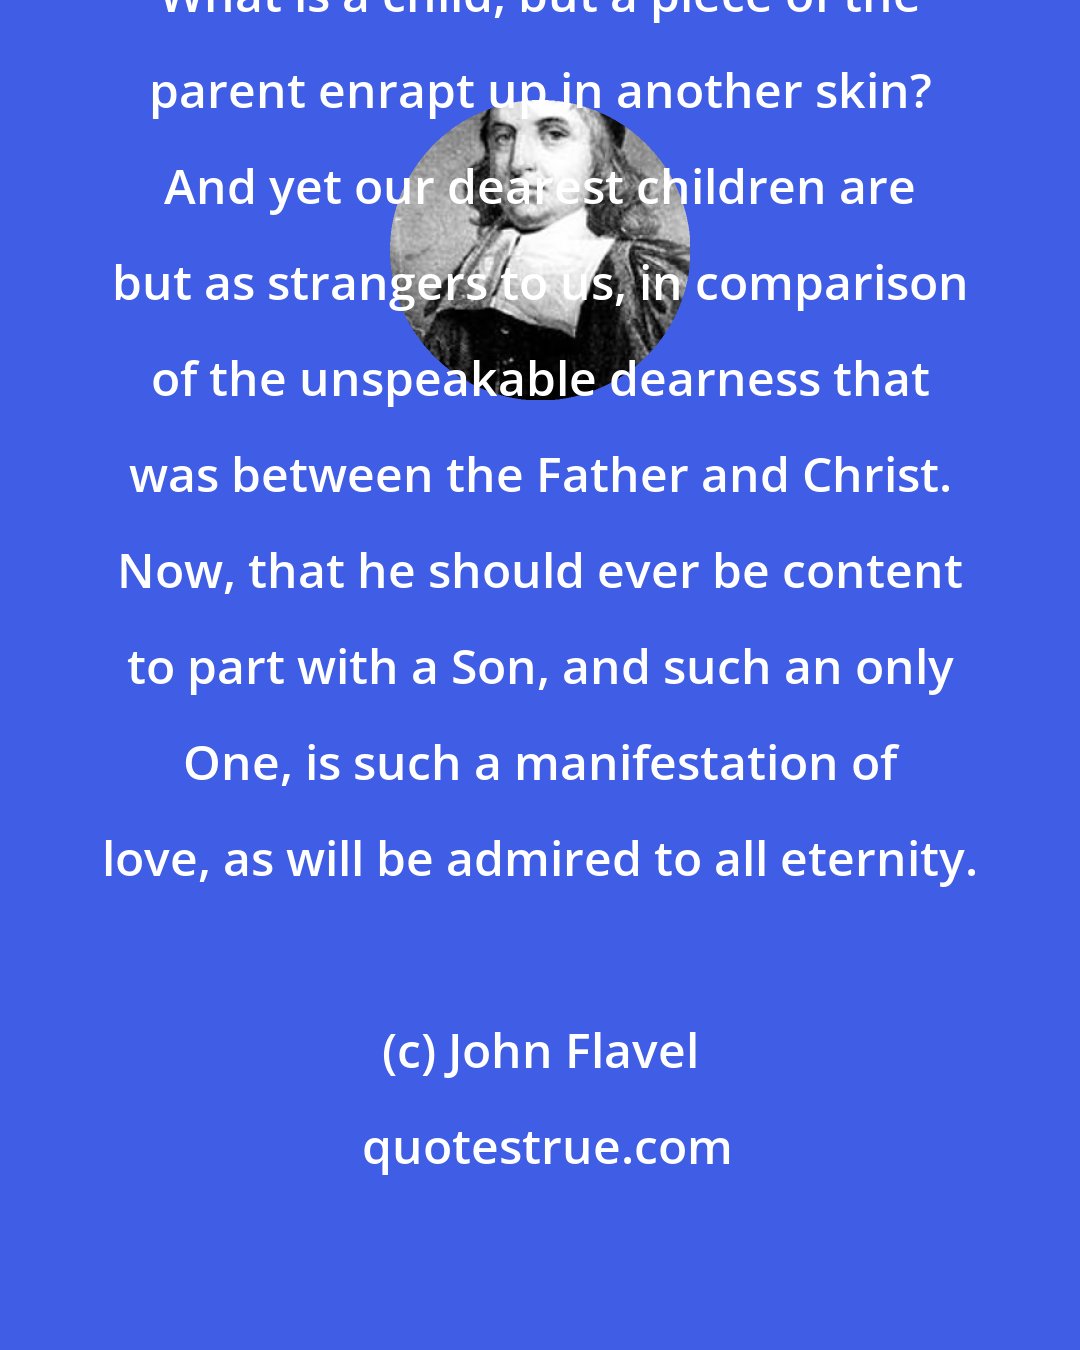 John Flavel: What is a child, but a piece of the parent enrapt up in another skin? And yet our dearest children are but as strangers to us, in comparison of the unspeakable dearness that was between the Father and Christ. Now, that he should ever be content to part with a Son, and such an only One, is such a manifestation of love, as will be admired to all eternity.